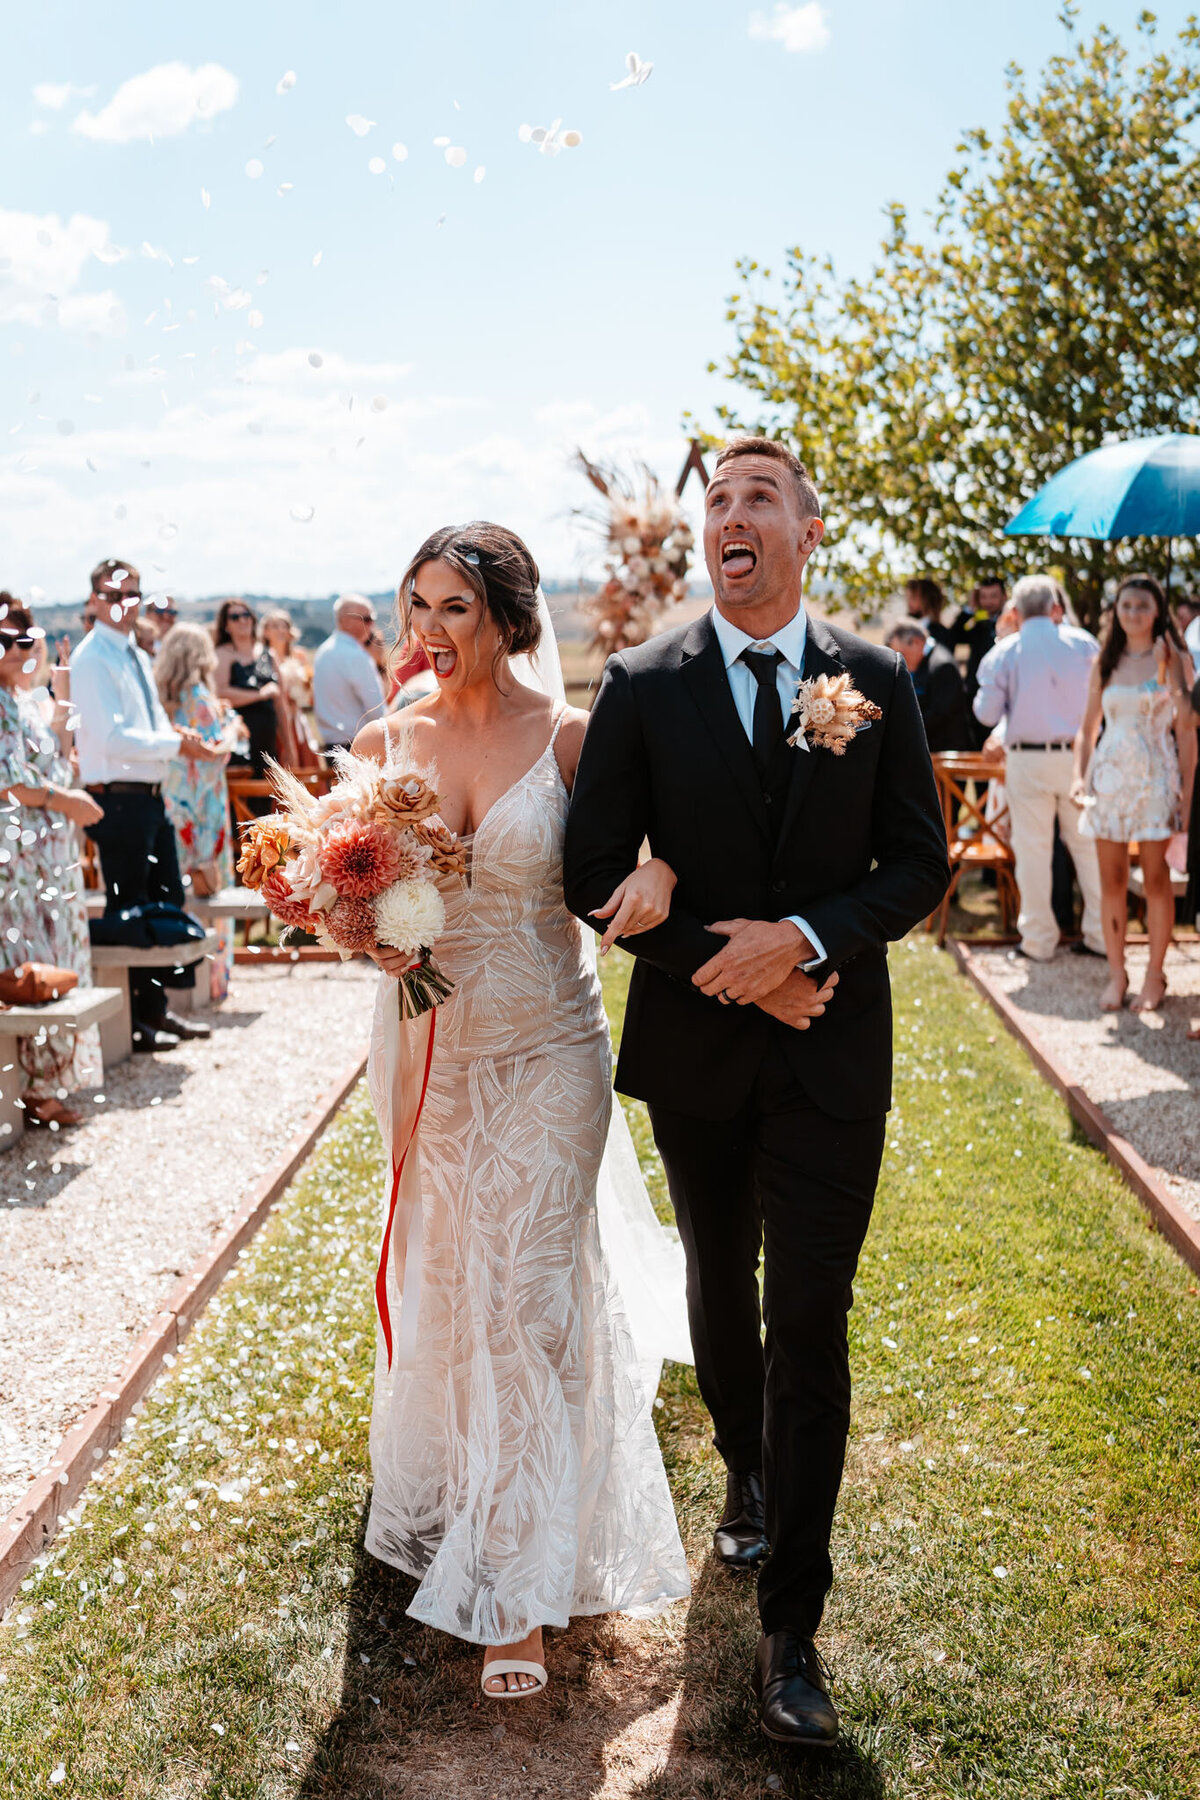 Mikaeley & Lachlan's walks down the aisle as they celebrate their wedding!